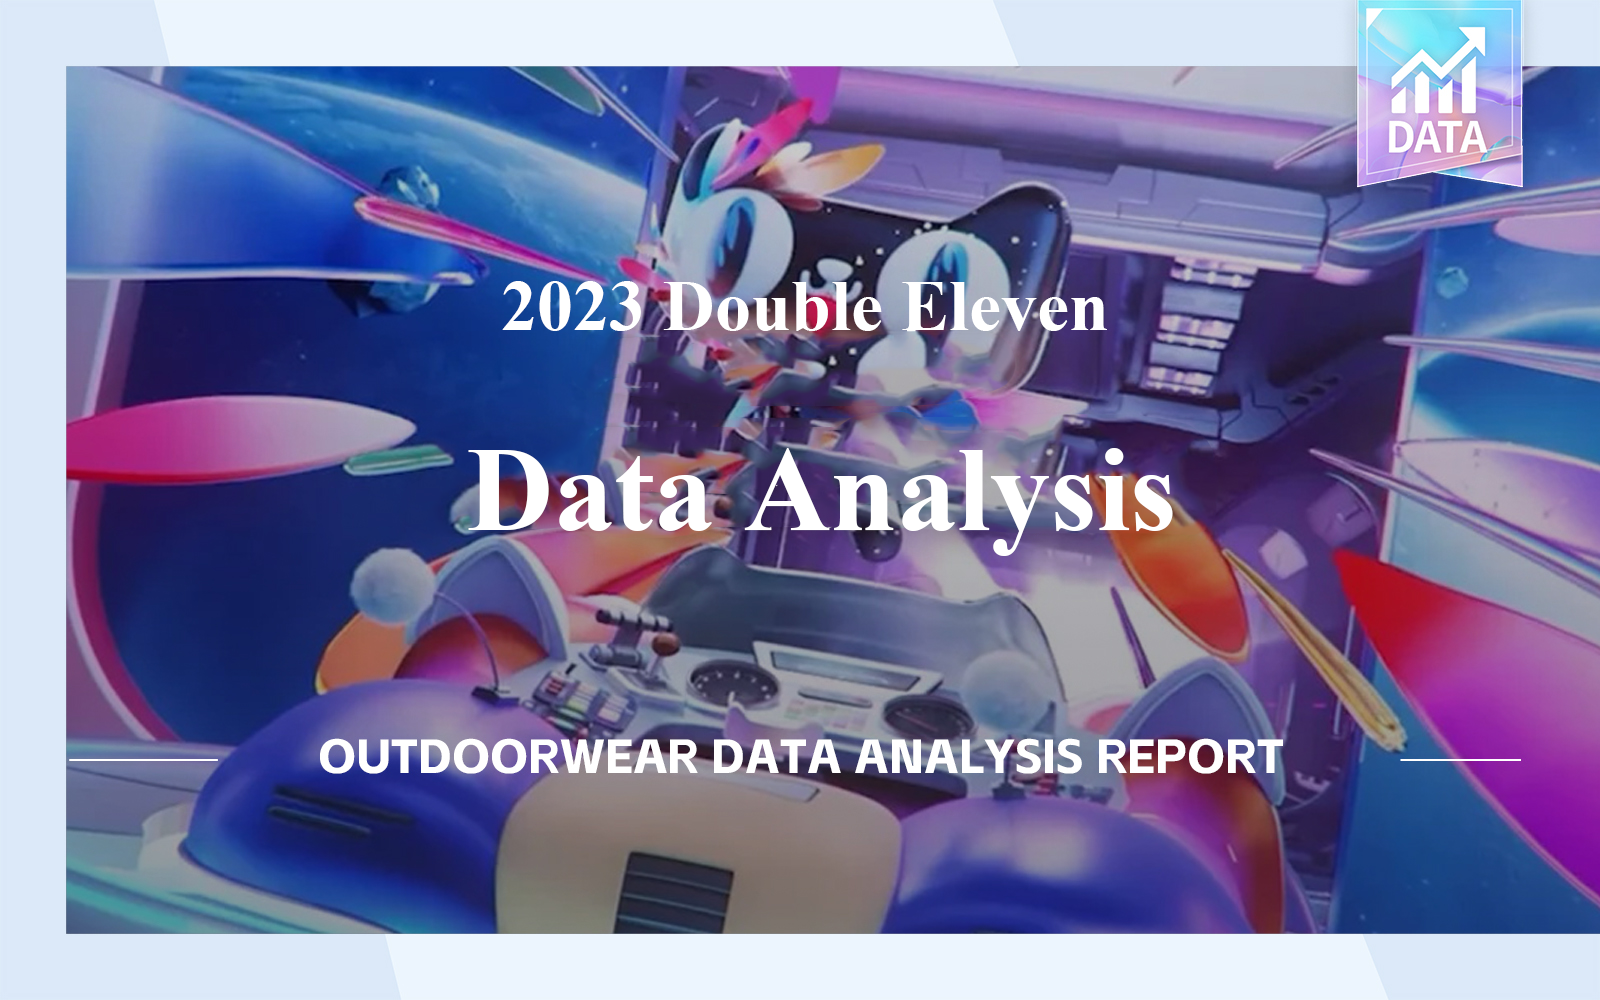 2023 Double Eleven Data Analysis of Outdoorwear